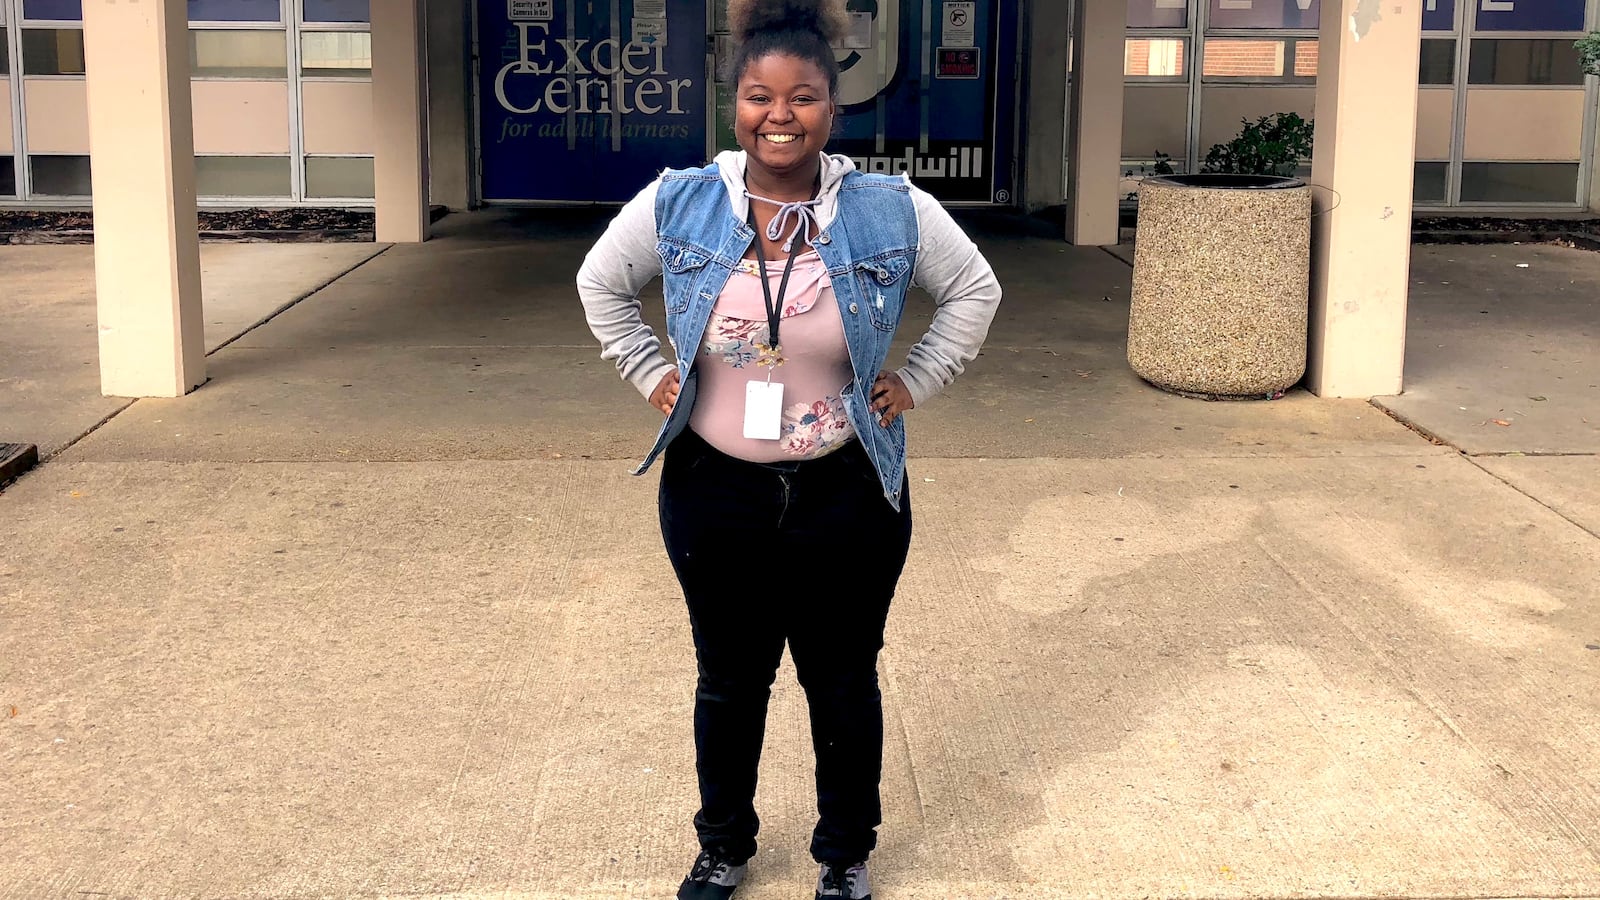 Kennishia Pratts, 19, is on track to graduate from The Excel Center in December. She plans to attend Spelman College, a prestigious historically black women’s college.